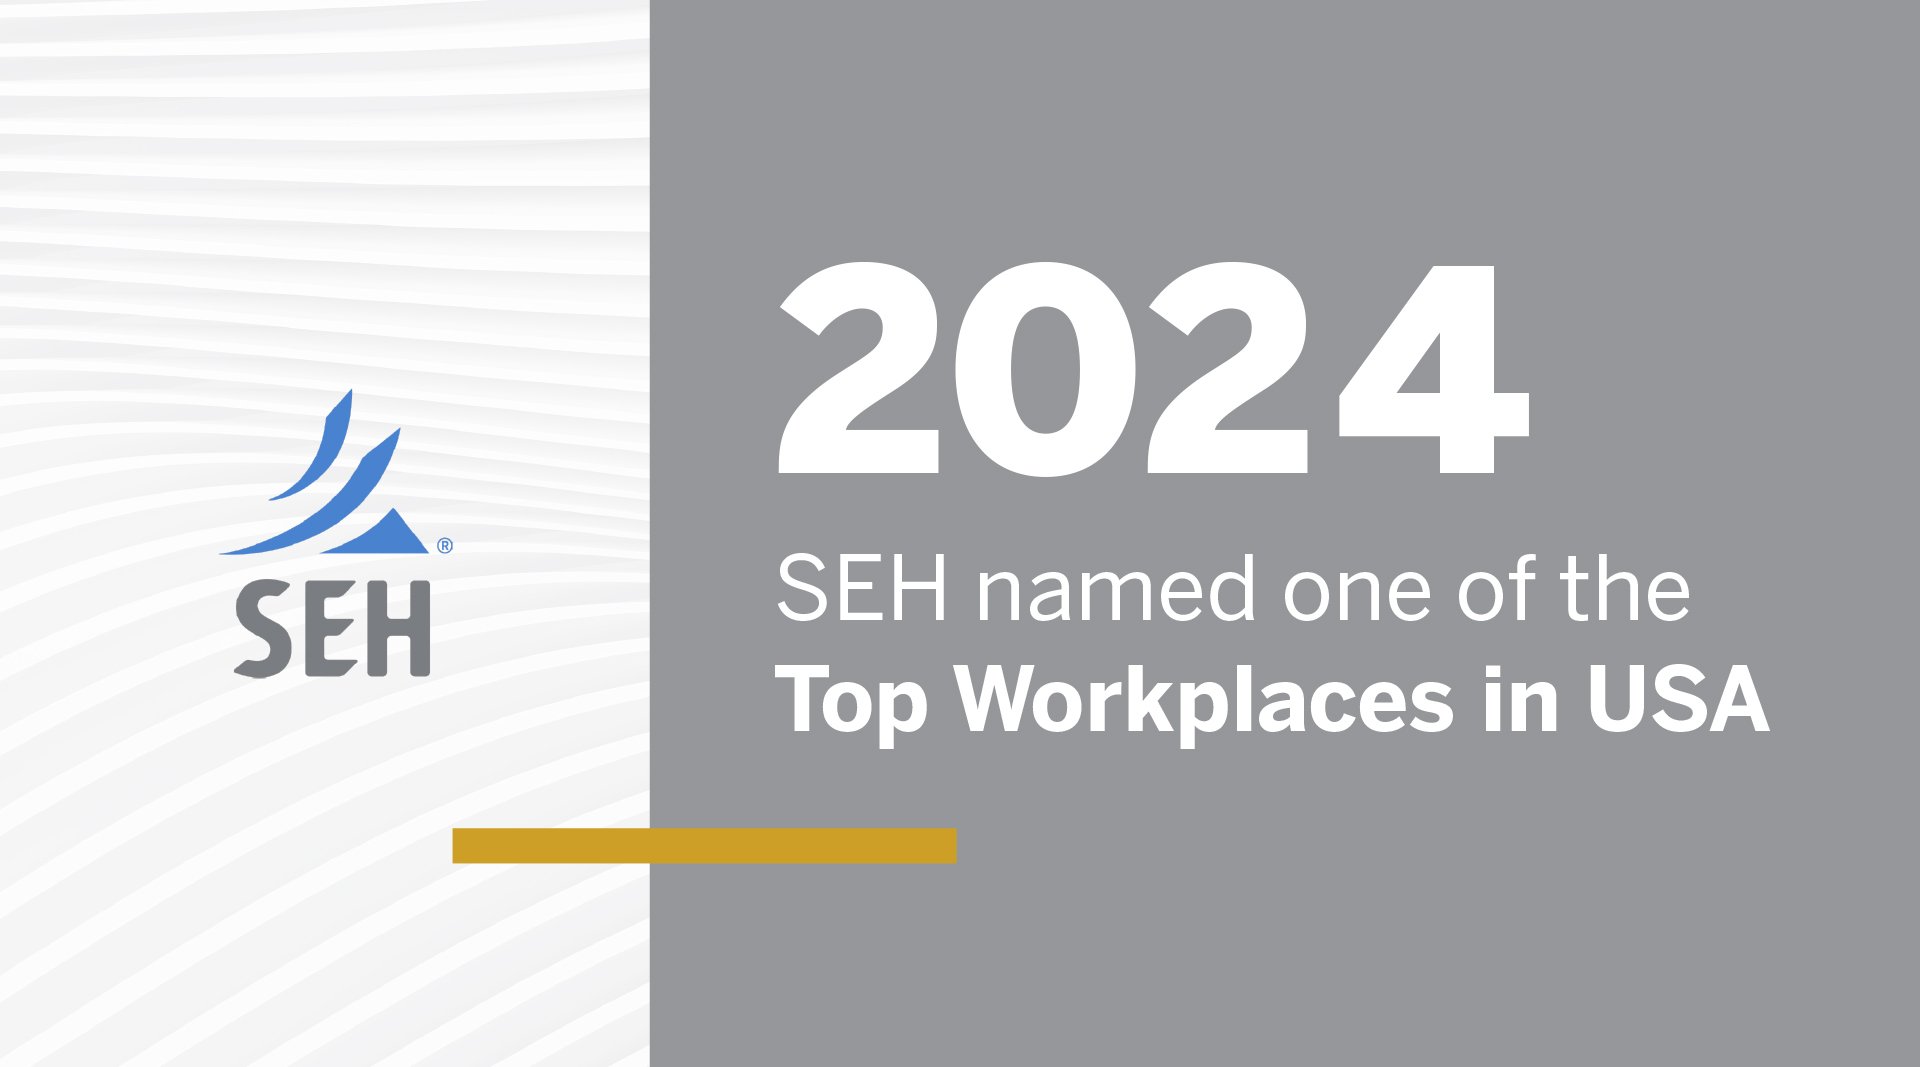 Graphic that has SEH logo and says "2024 SEH named one of the Top Workplaces in USA"